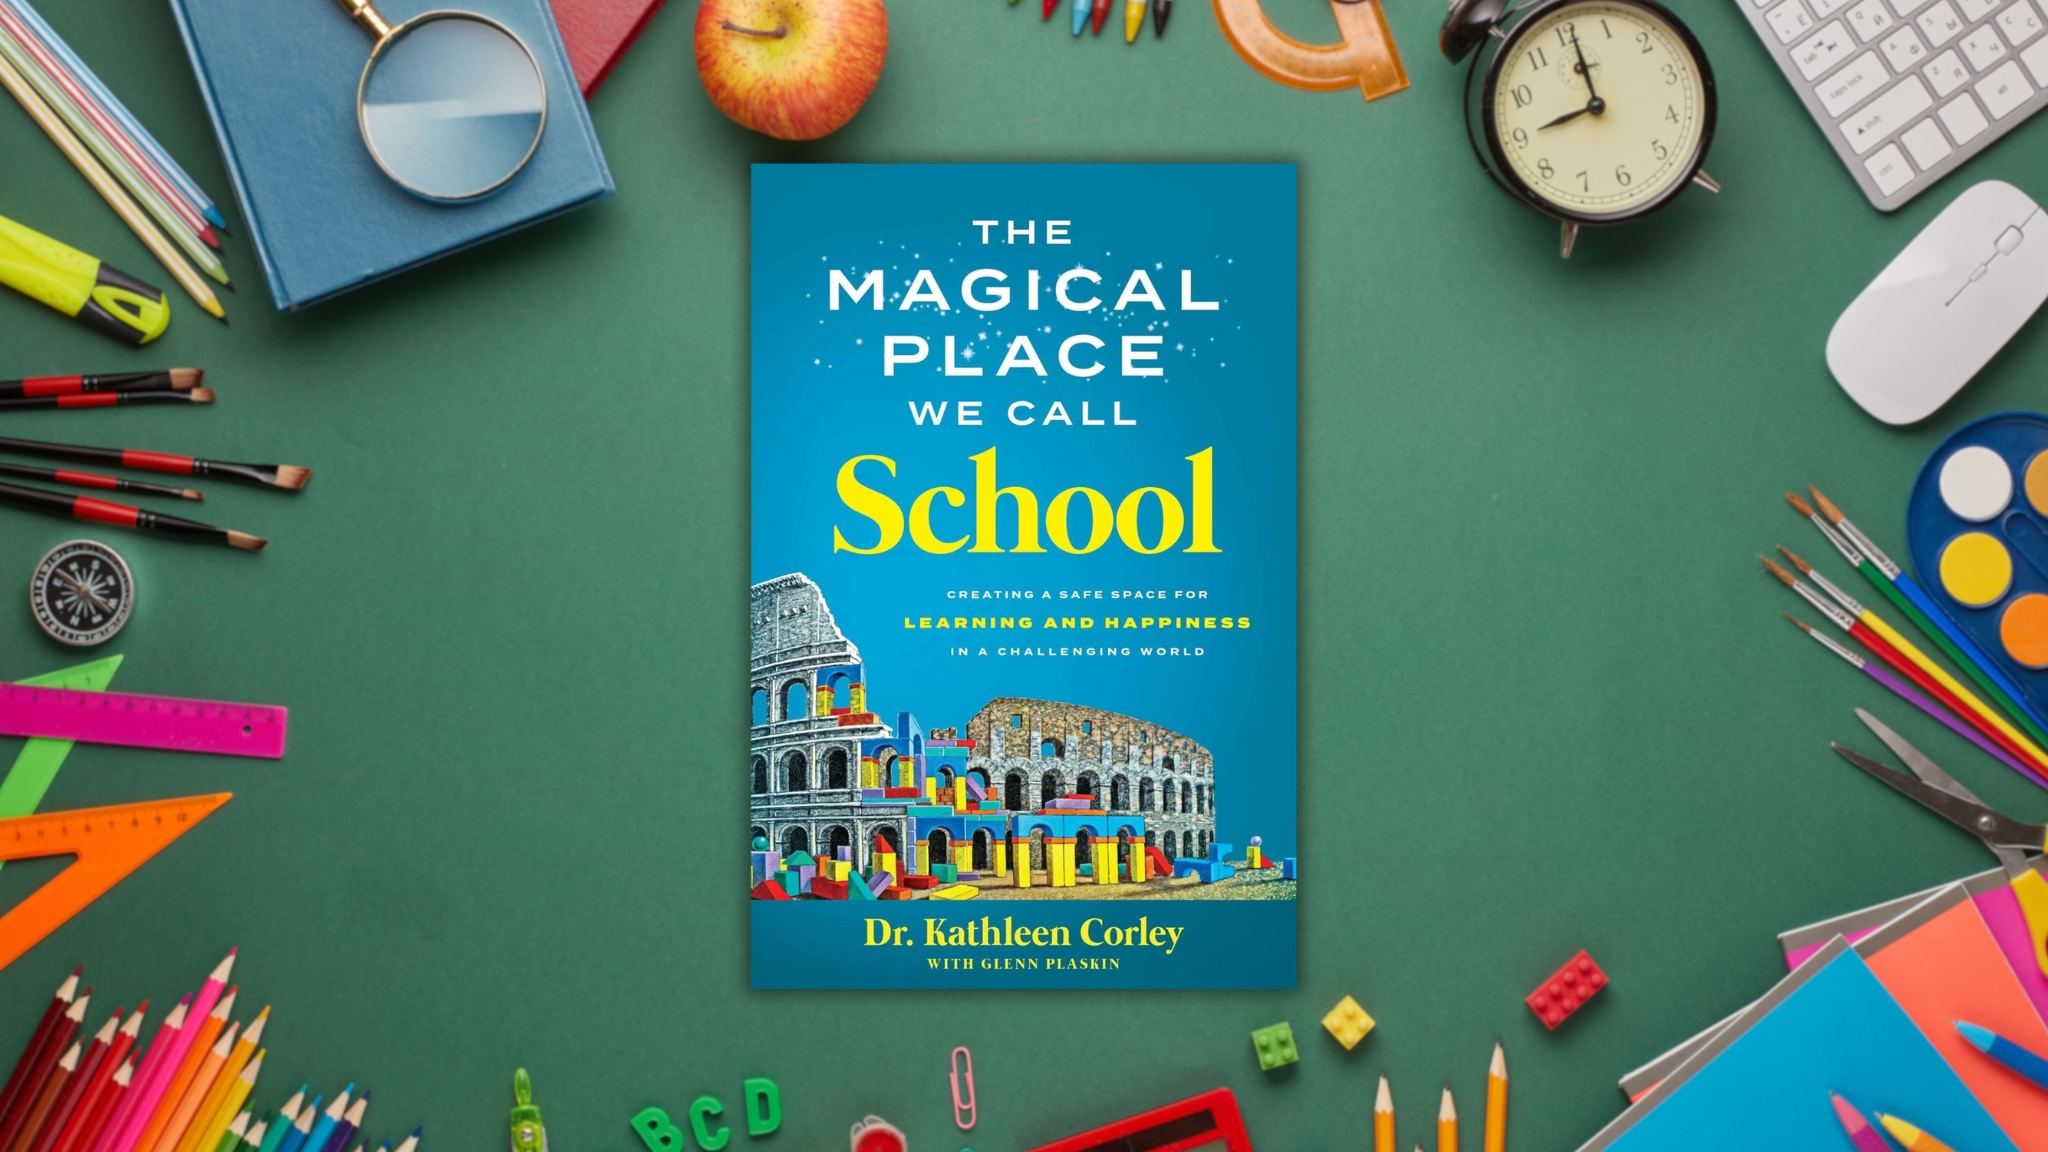 The Magical Place We Call School by Dr. Kathleen Corley